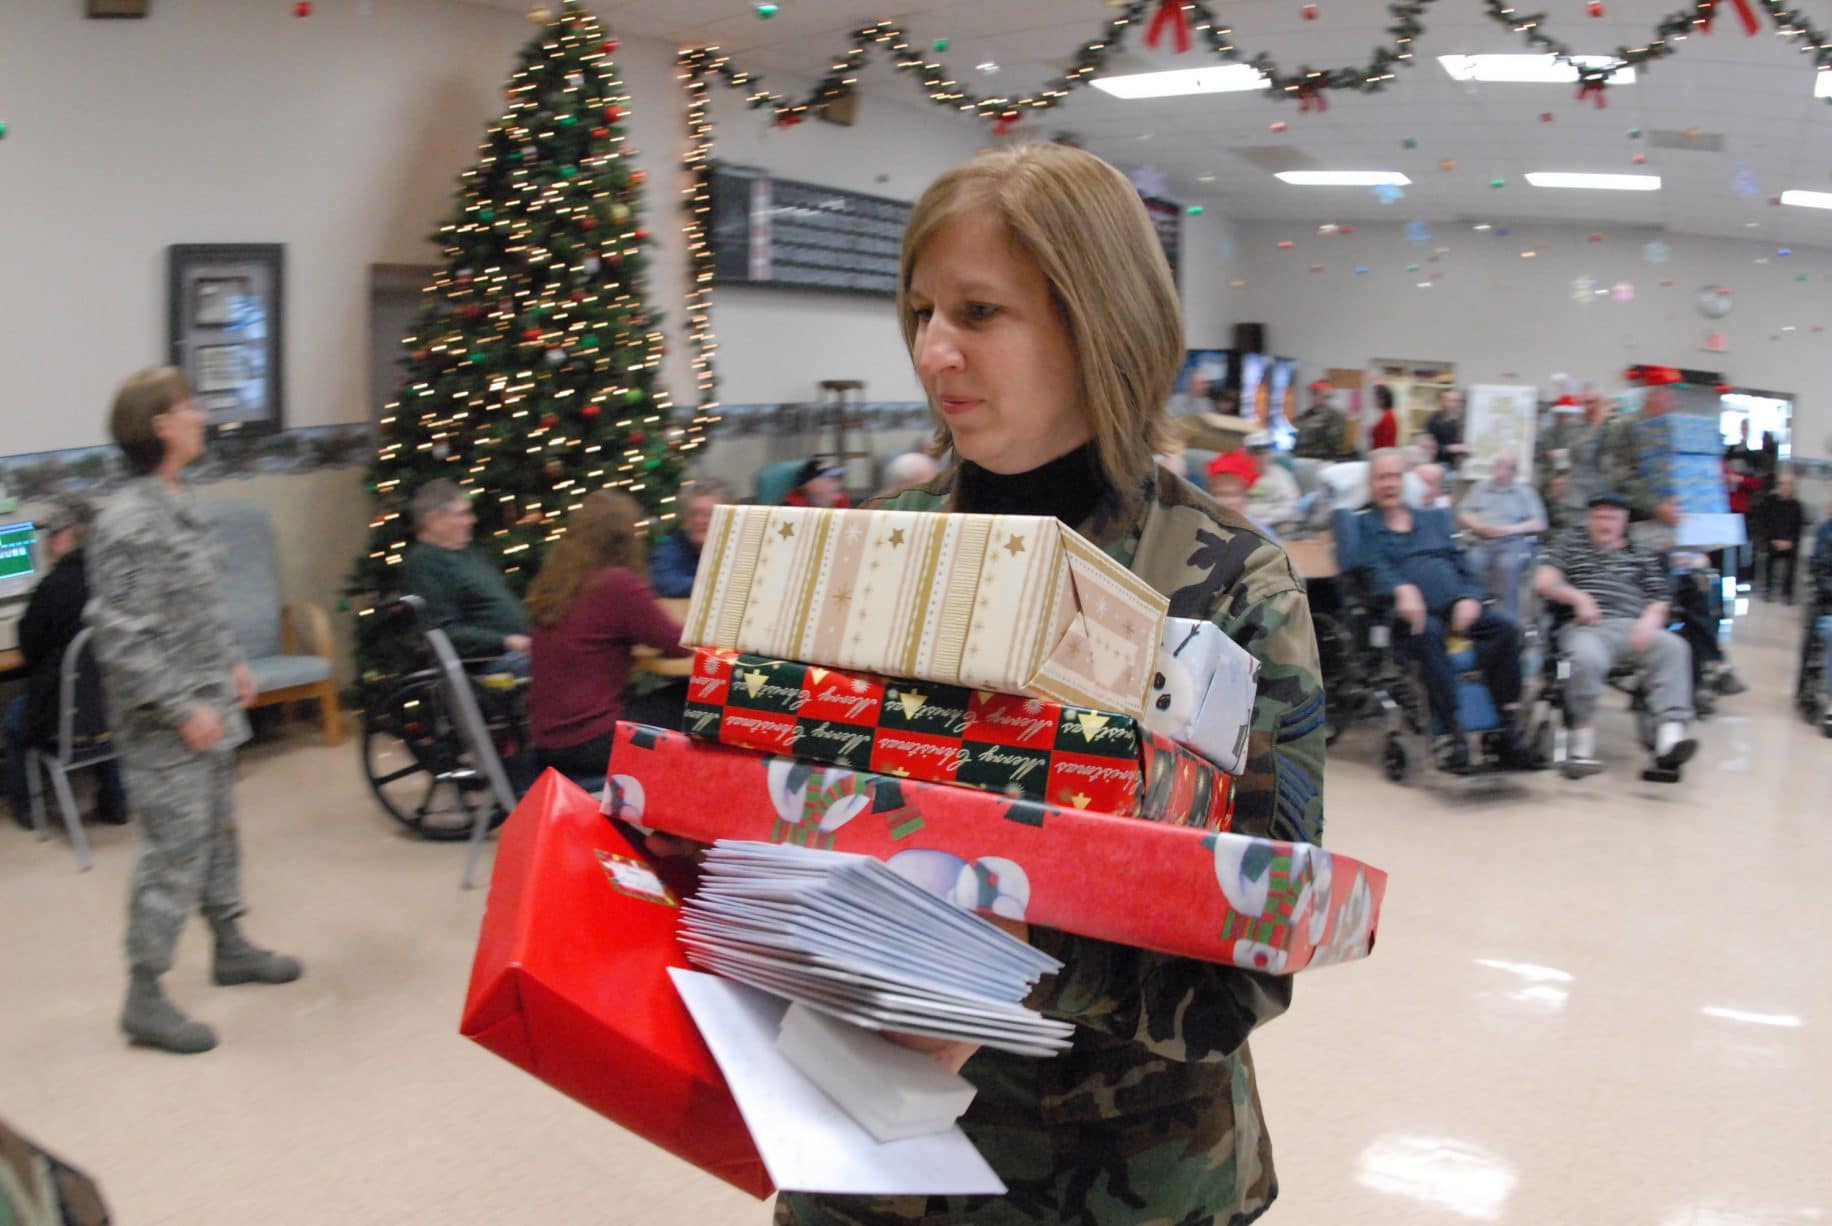 Nonprofit makes Christmas merry for veterans 'A lot of them wouldn't